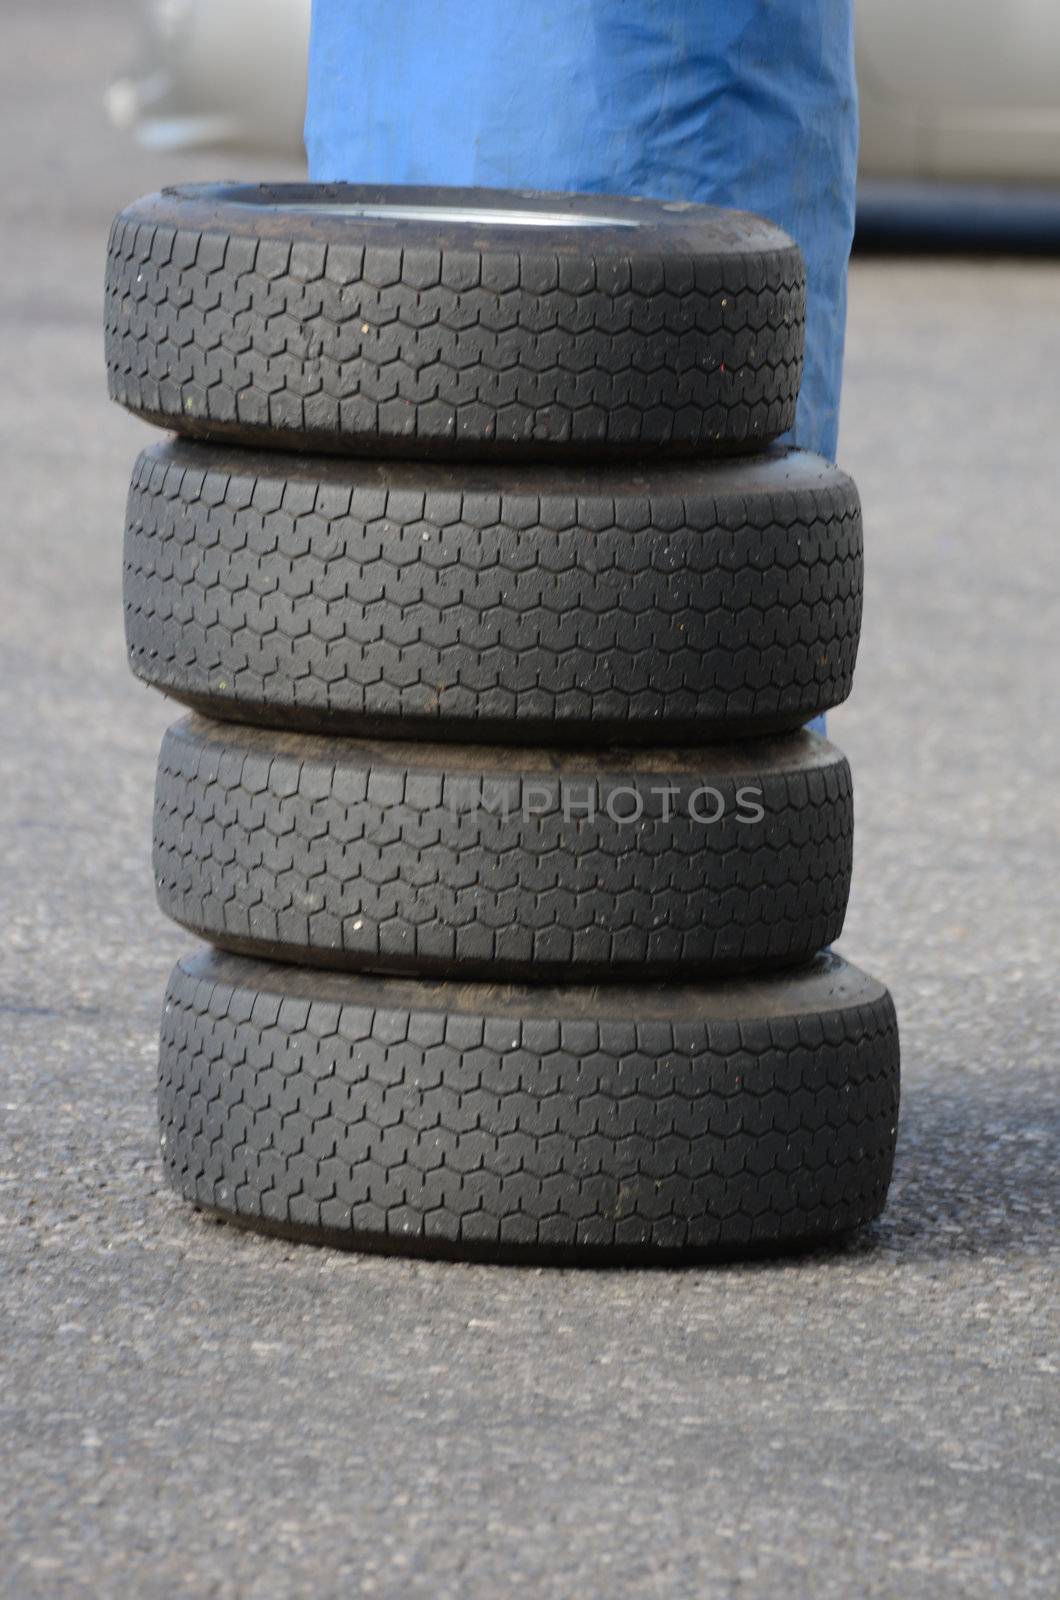 Pile of race tyres